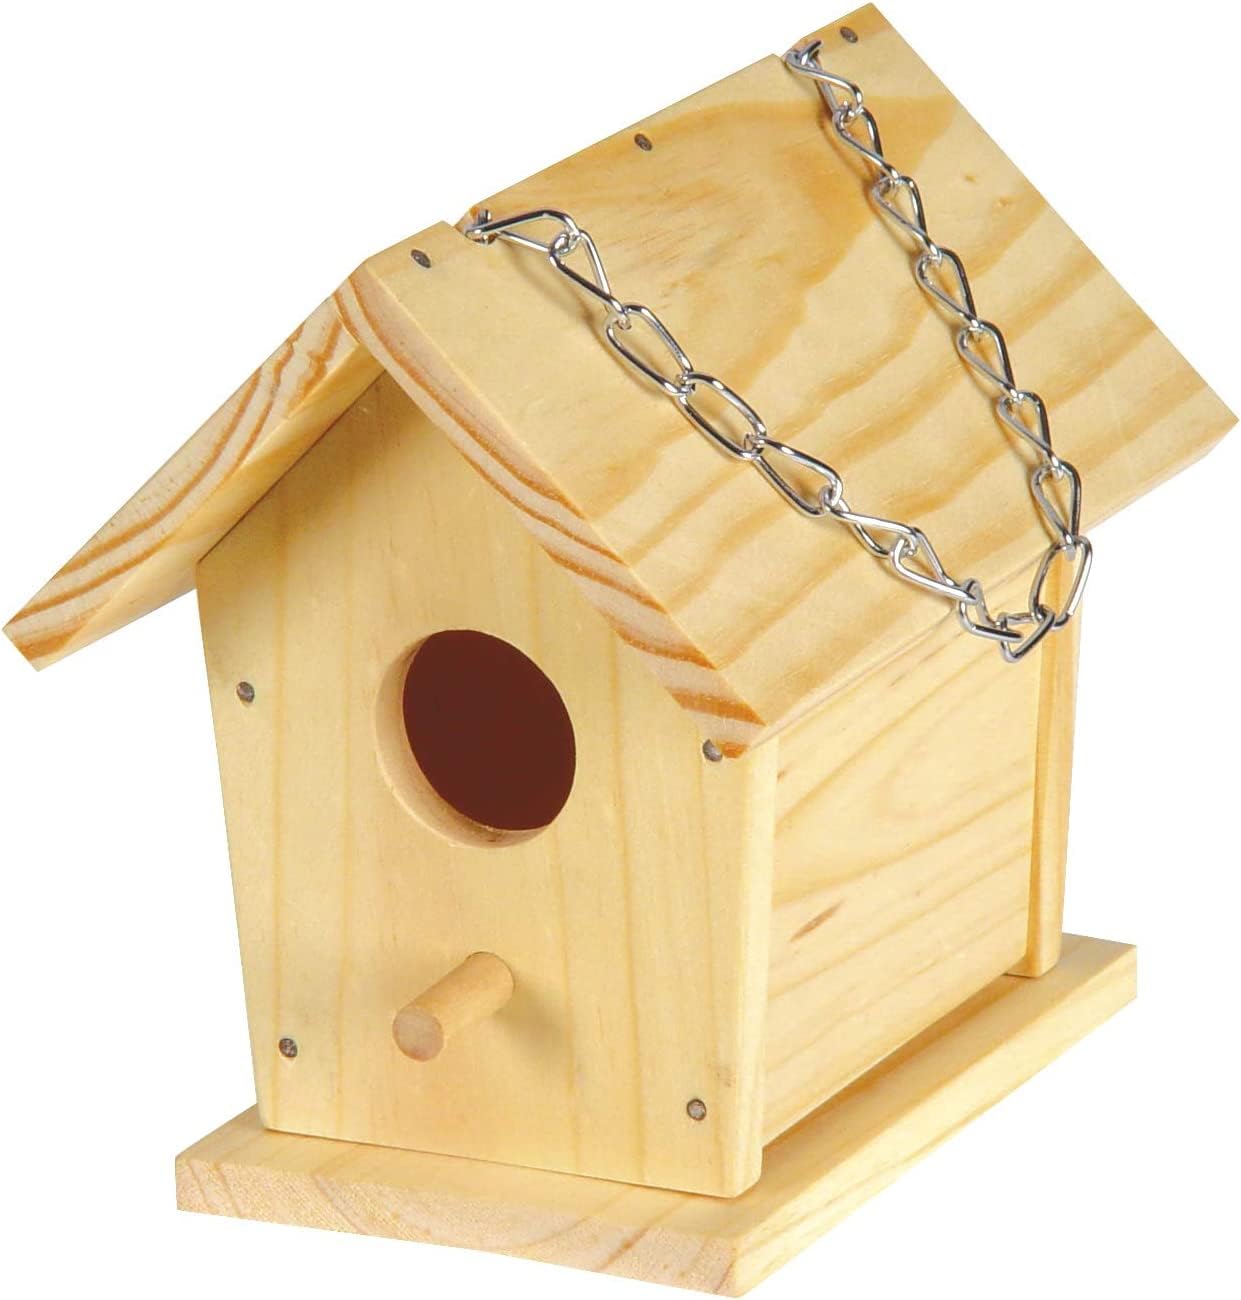 Beetle & Bee Build A Bird Bungalow - DIY Kid Art Craft Outdoor Birdhouse Kit, Bird House Painting Kit for Kids, Hardware & Glue Included- 4 Paints, 1 Brush, 7 Wooden Pcs, Chain For Tree Hanging Age 5+